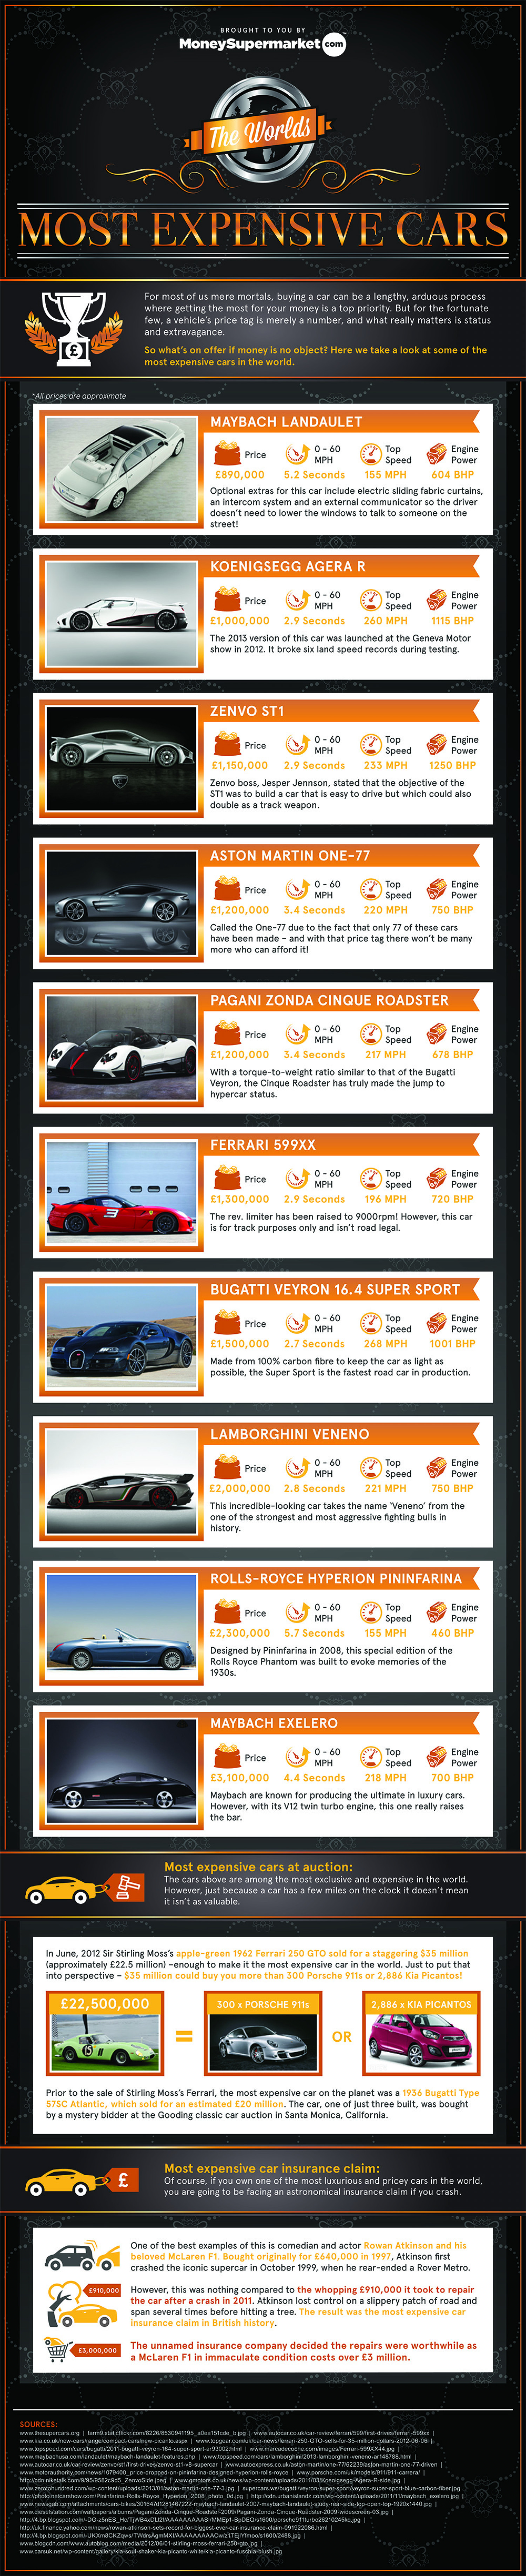 The World's Most Expensive Cars Infographic